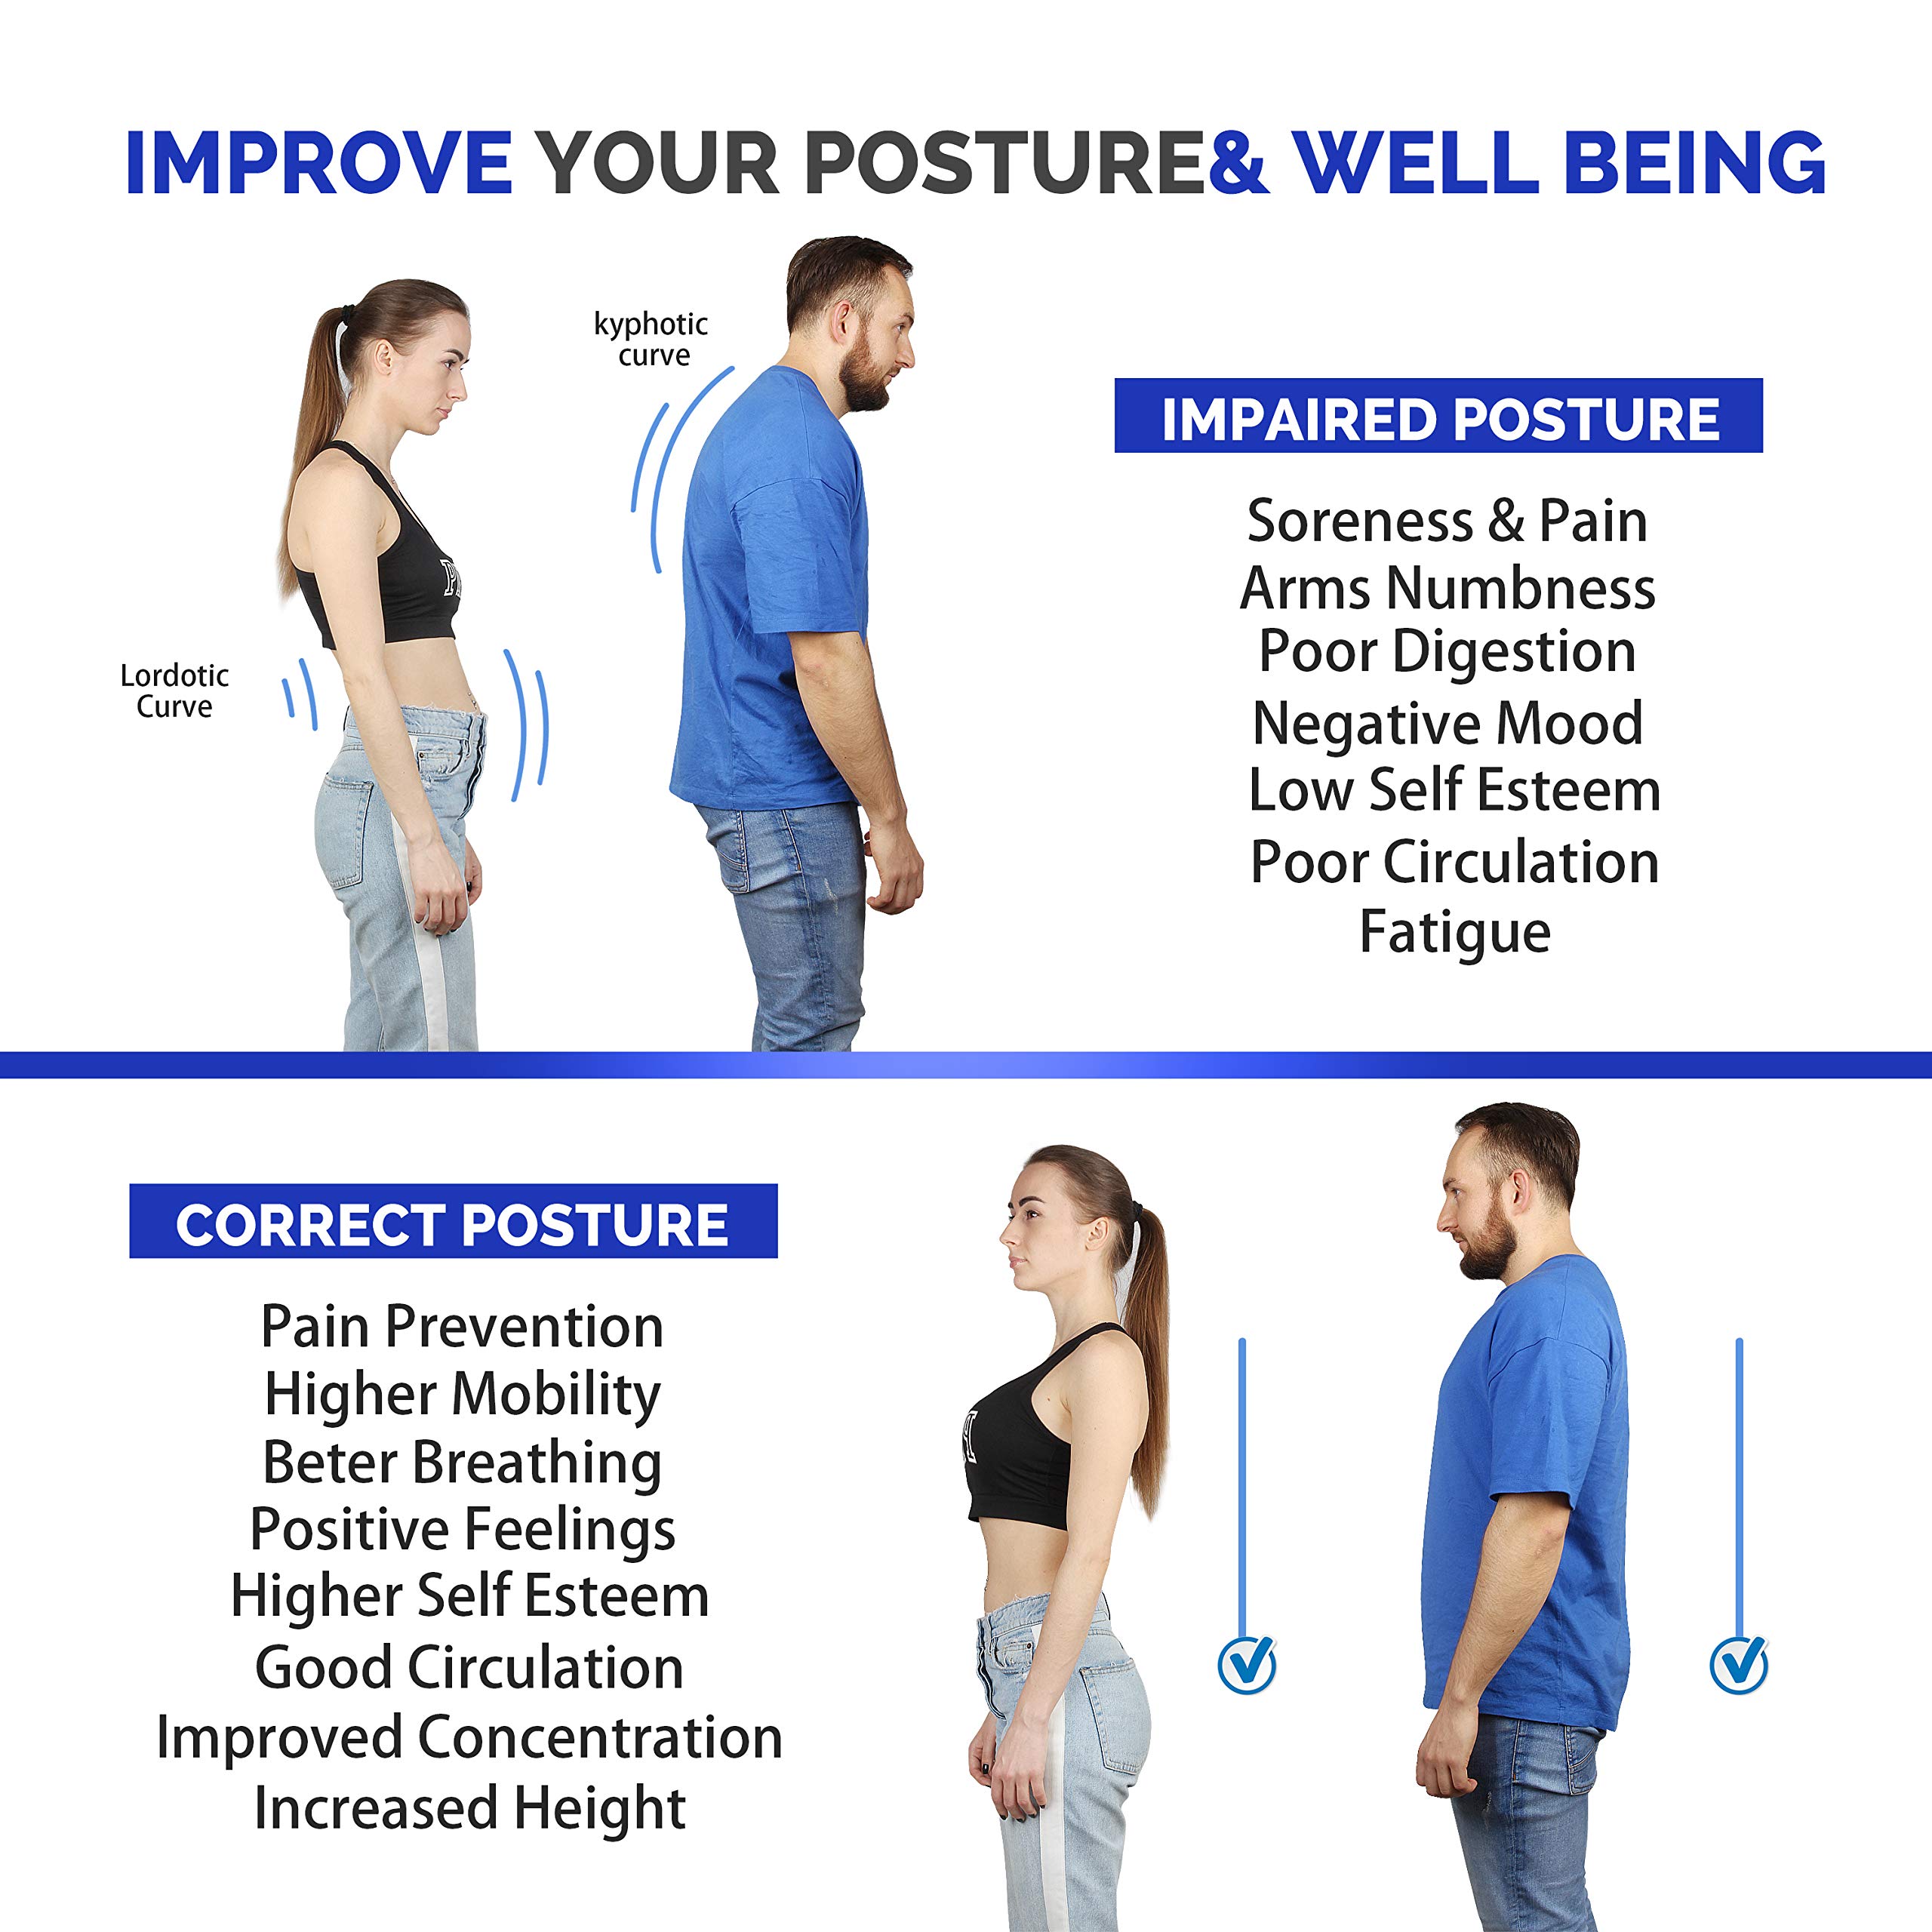 SR SUN ROOM Posture Corrector For Men And Women- Adjustable Upper Back Brace For Clavicle Support and Providing Pain Relief From Neck, Back and Shoulder